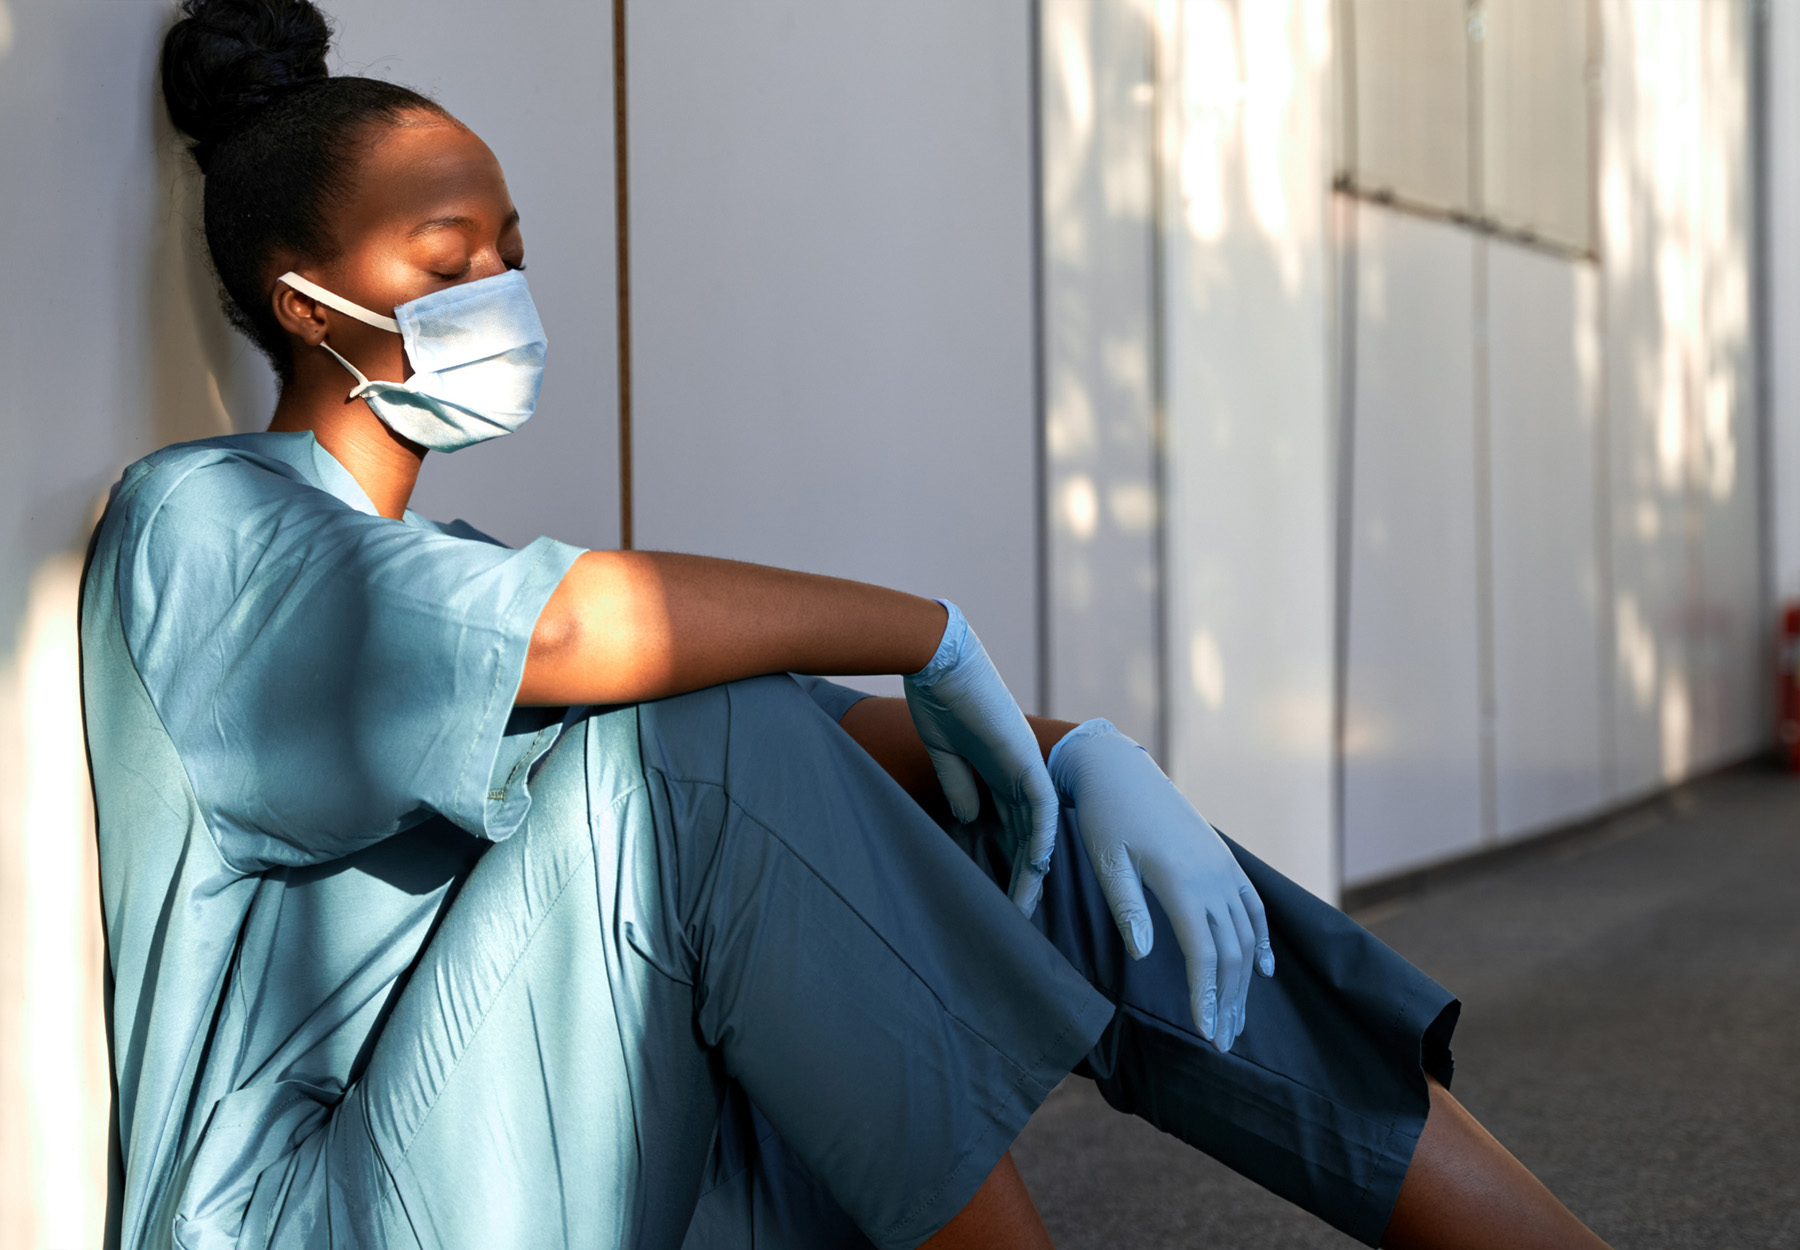 Stressed African American healthcare worker in scrubs, mask, and gloves, sits in the hallway of a hospital with her eyes closed. Stock photo.